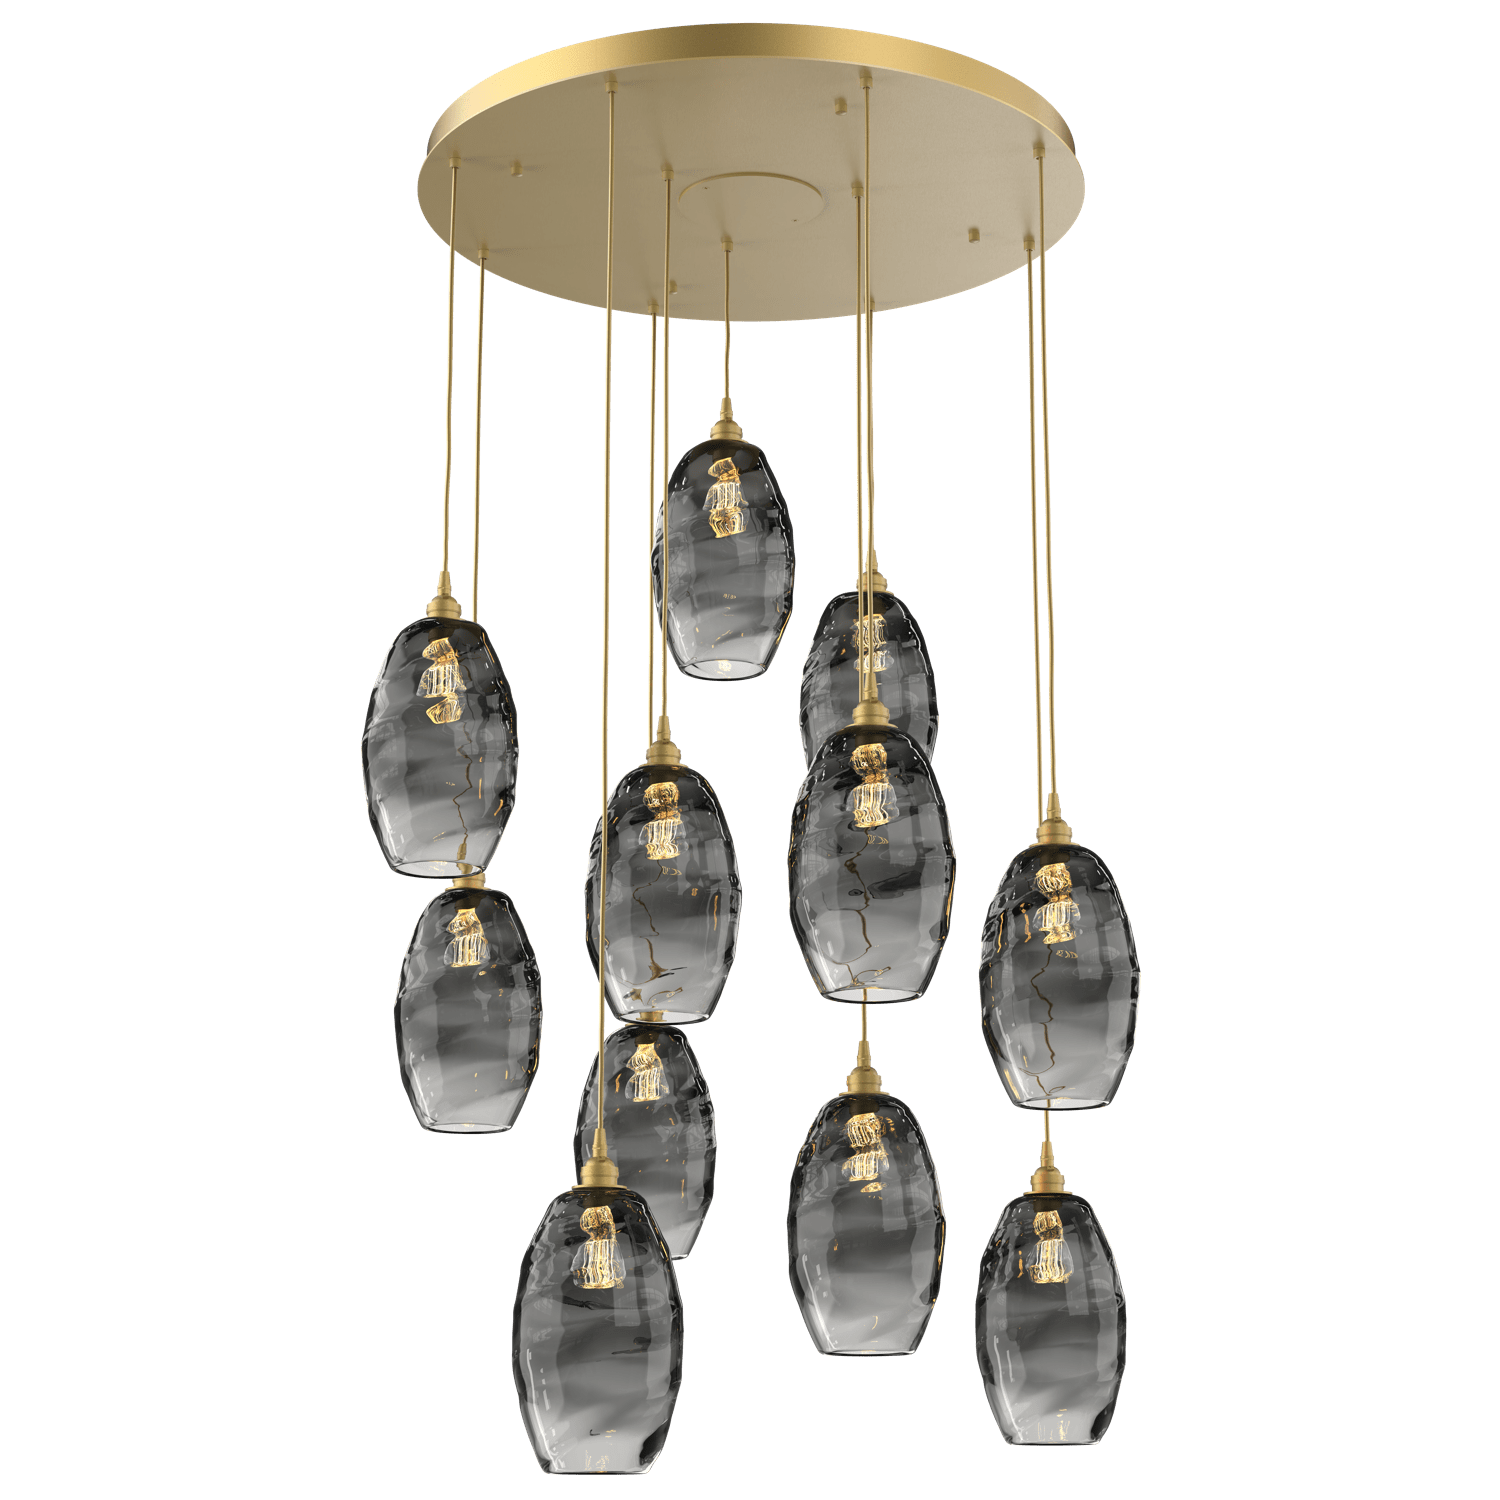 CHB0035-11-GB-OS-Hammerton-Studio-Optic-Blown-Glass-Elisse-11-light-round-pendant-chandelier-with-gilded-brass-finish-and-optic-smoke-blown-glass-shades-and-incandescent-lamping